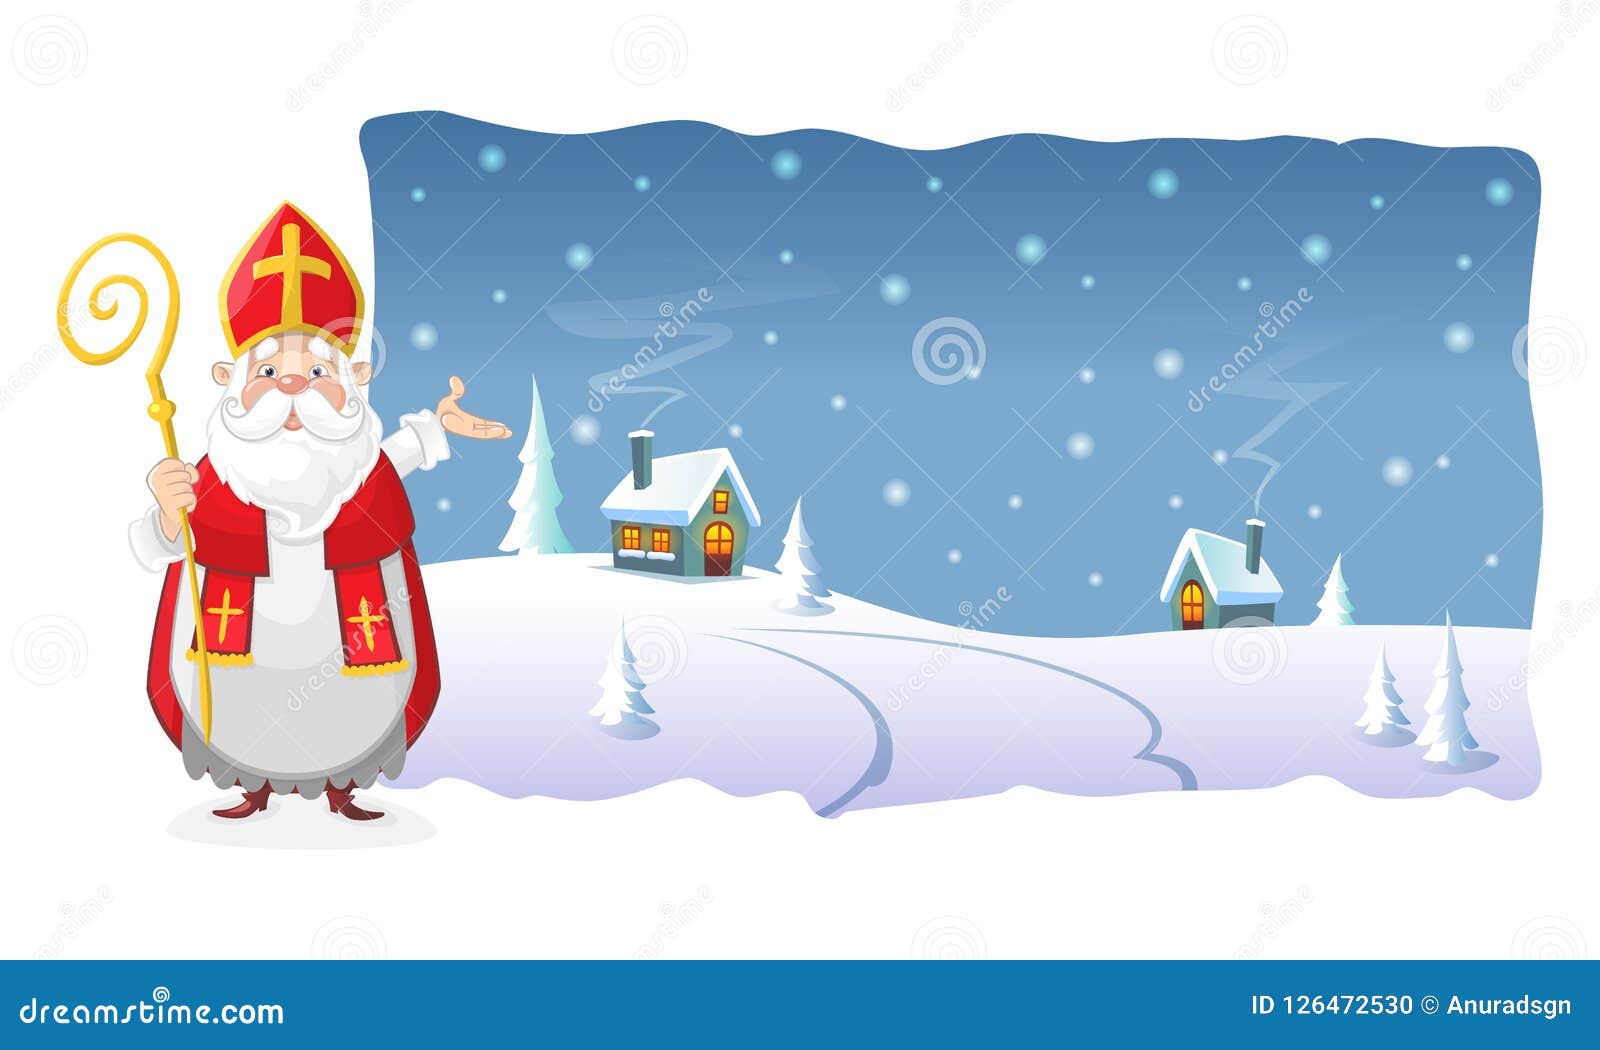 poster - saint nicholas show winter night at village in polylined 